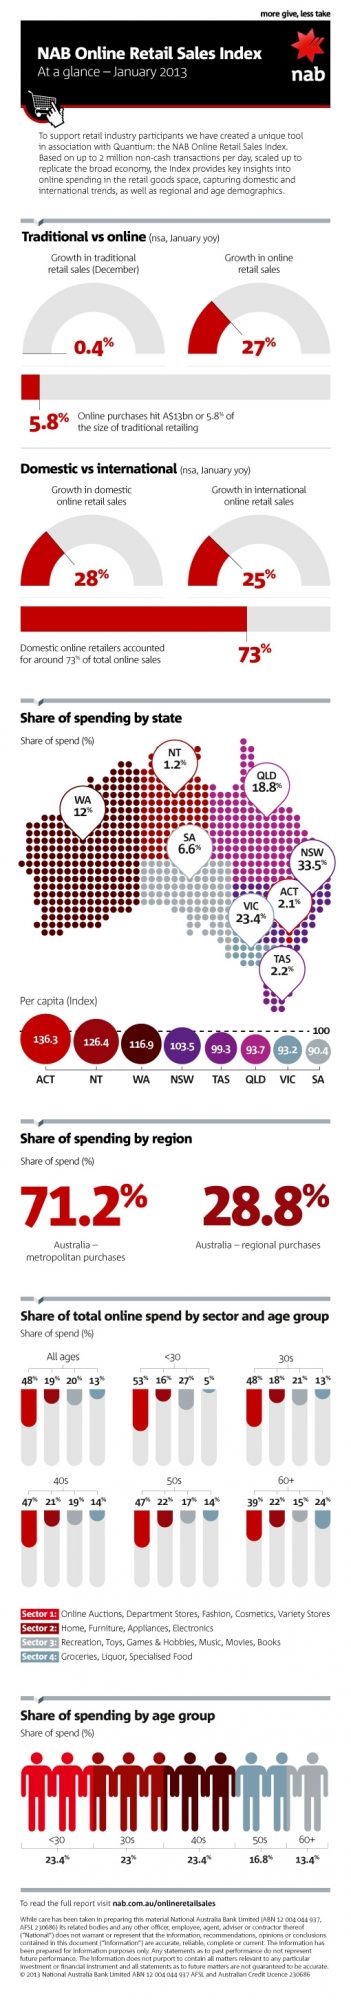 NAB Online Retail Sales Index January 2013 infographic